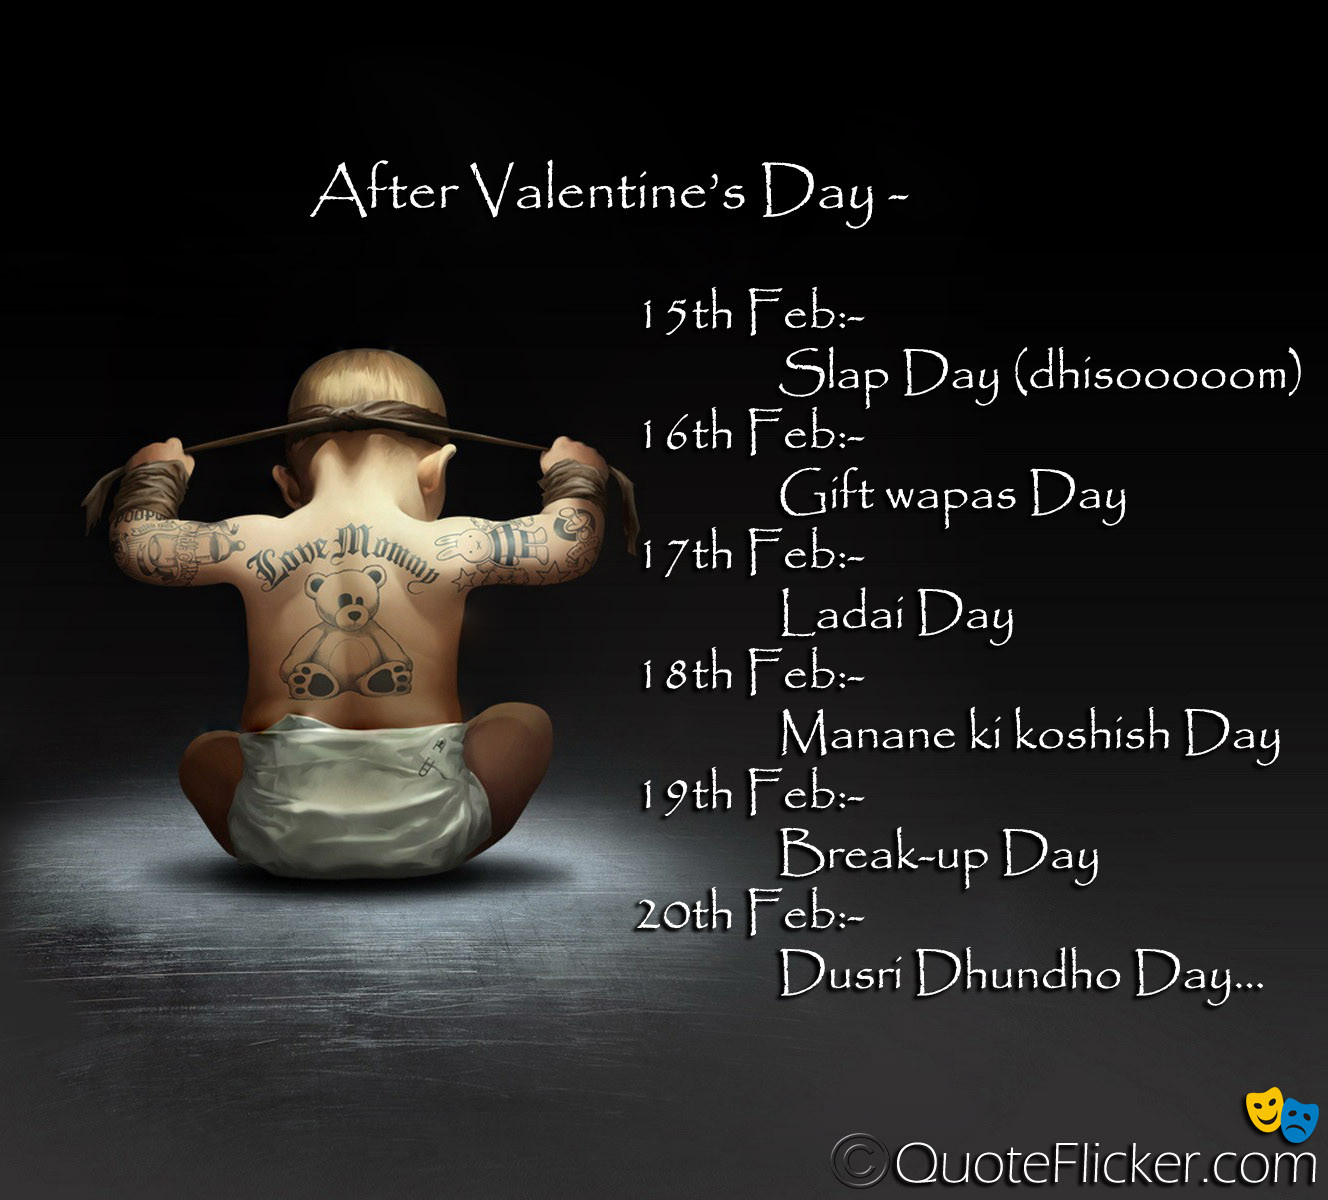 Valentines Day Movie Quote
 Funny Valentines Day Love Quotes After QuotesGram